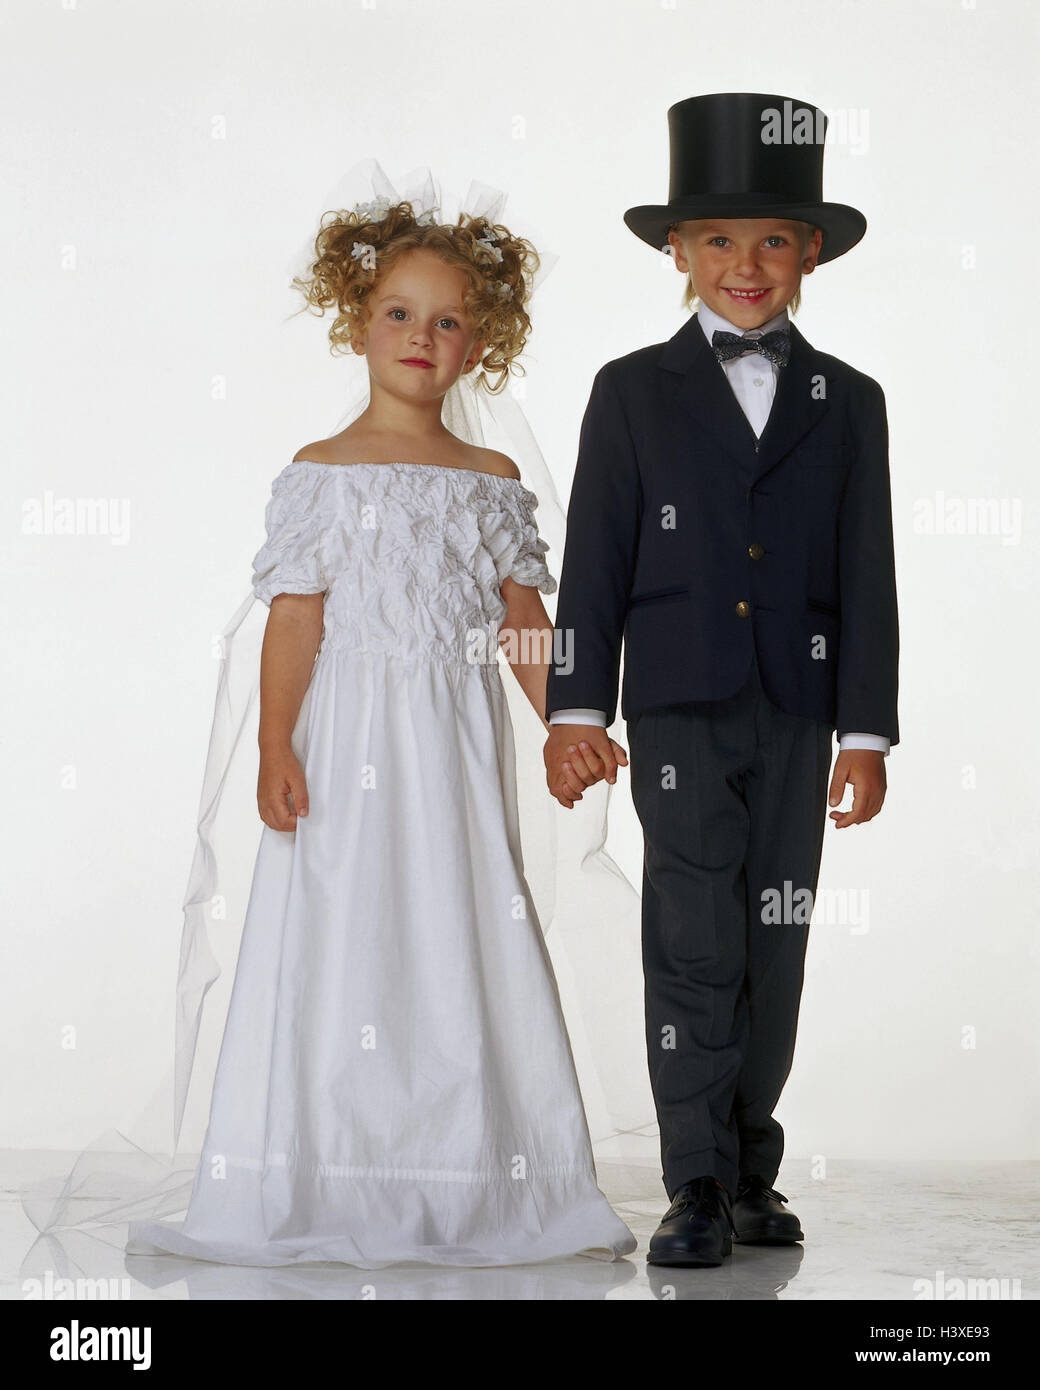 Children, bride and groom, hand in hand children, cut out, studio, inside, outside, wedding couple, wedding, marry, marriage, adult, game, play, lining Stock Photo